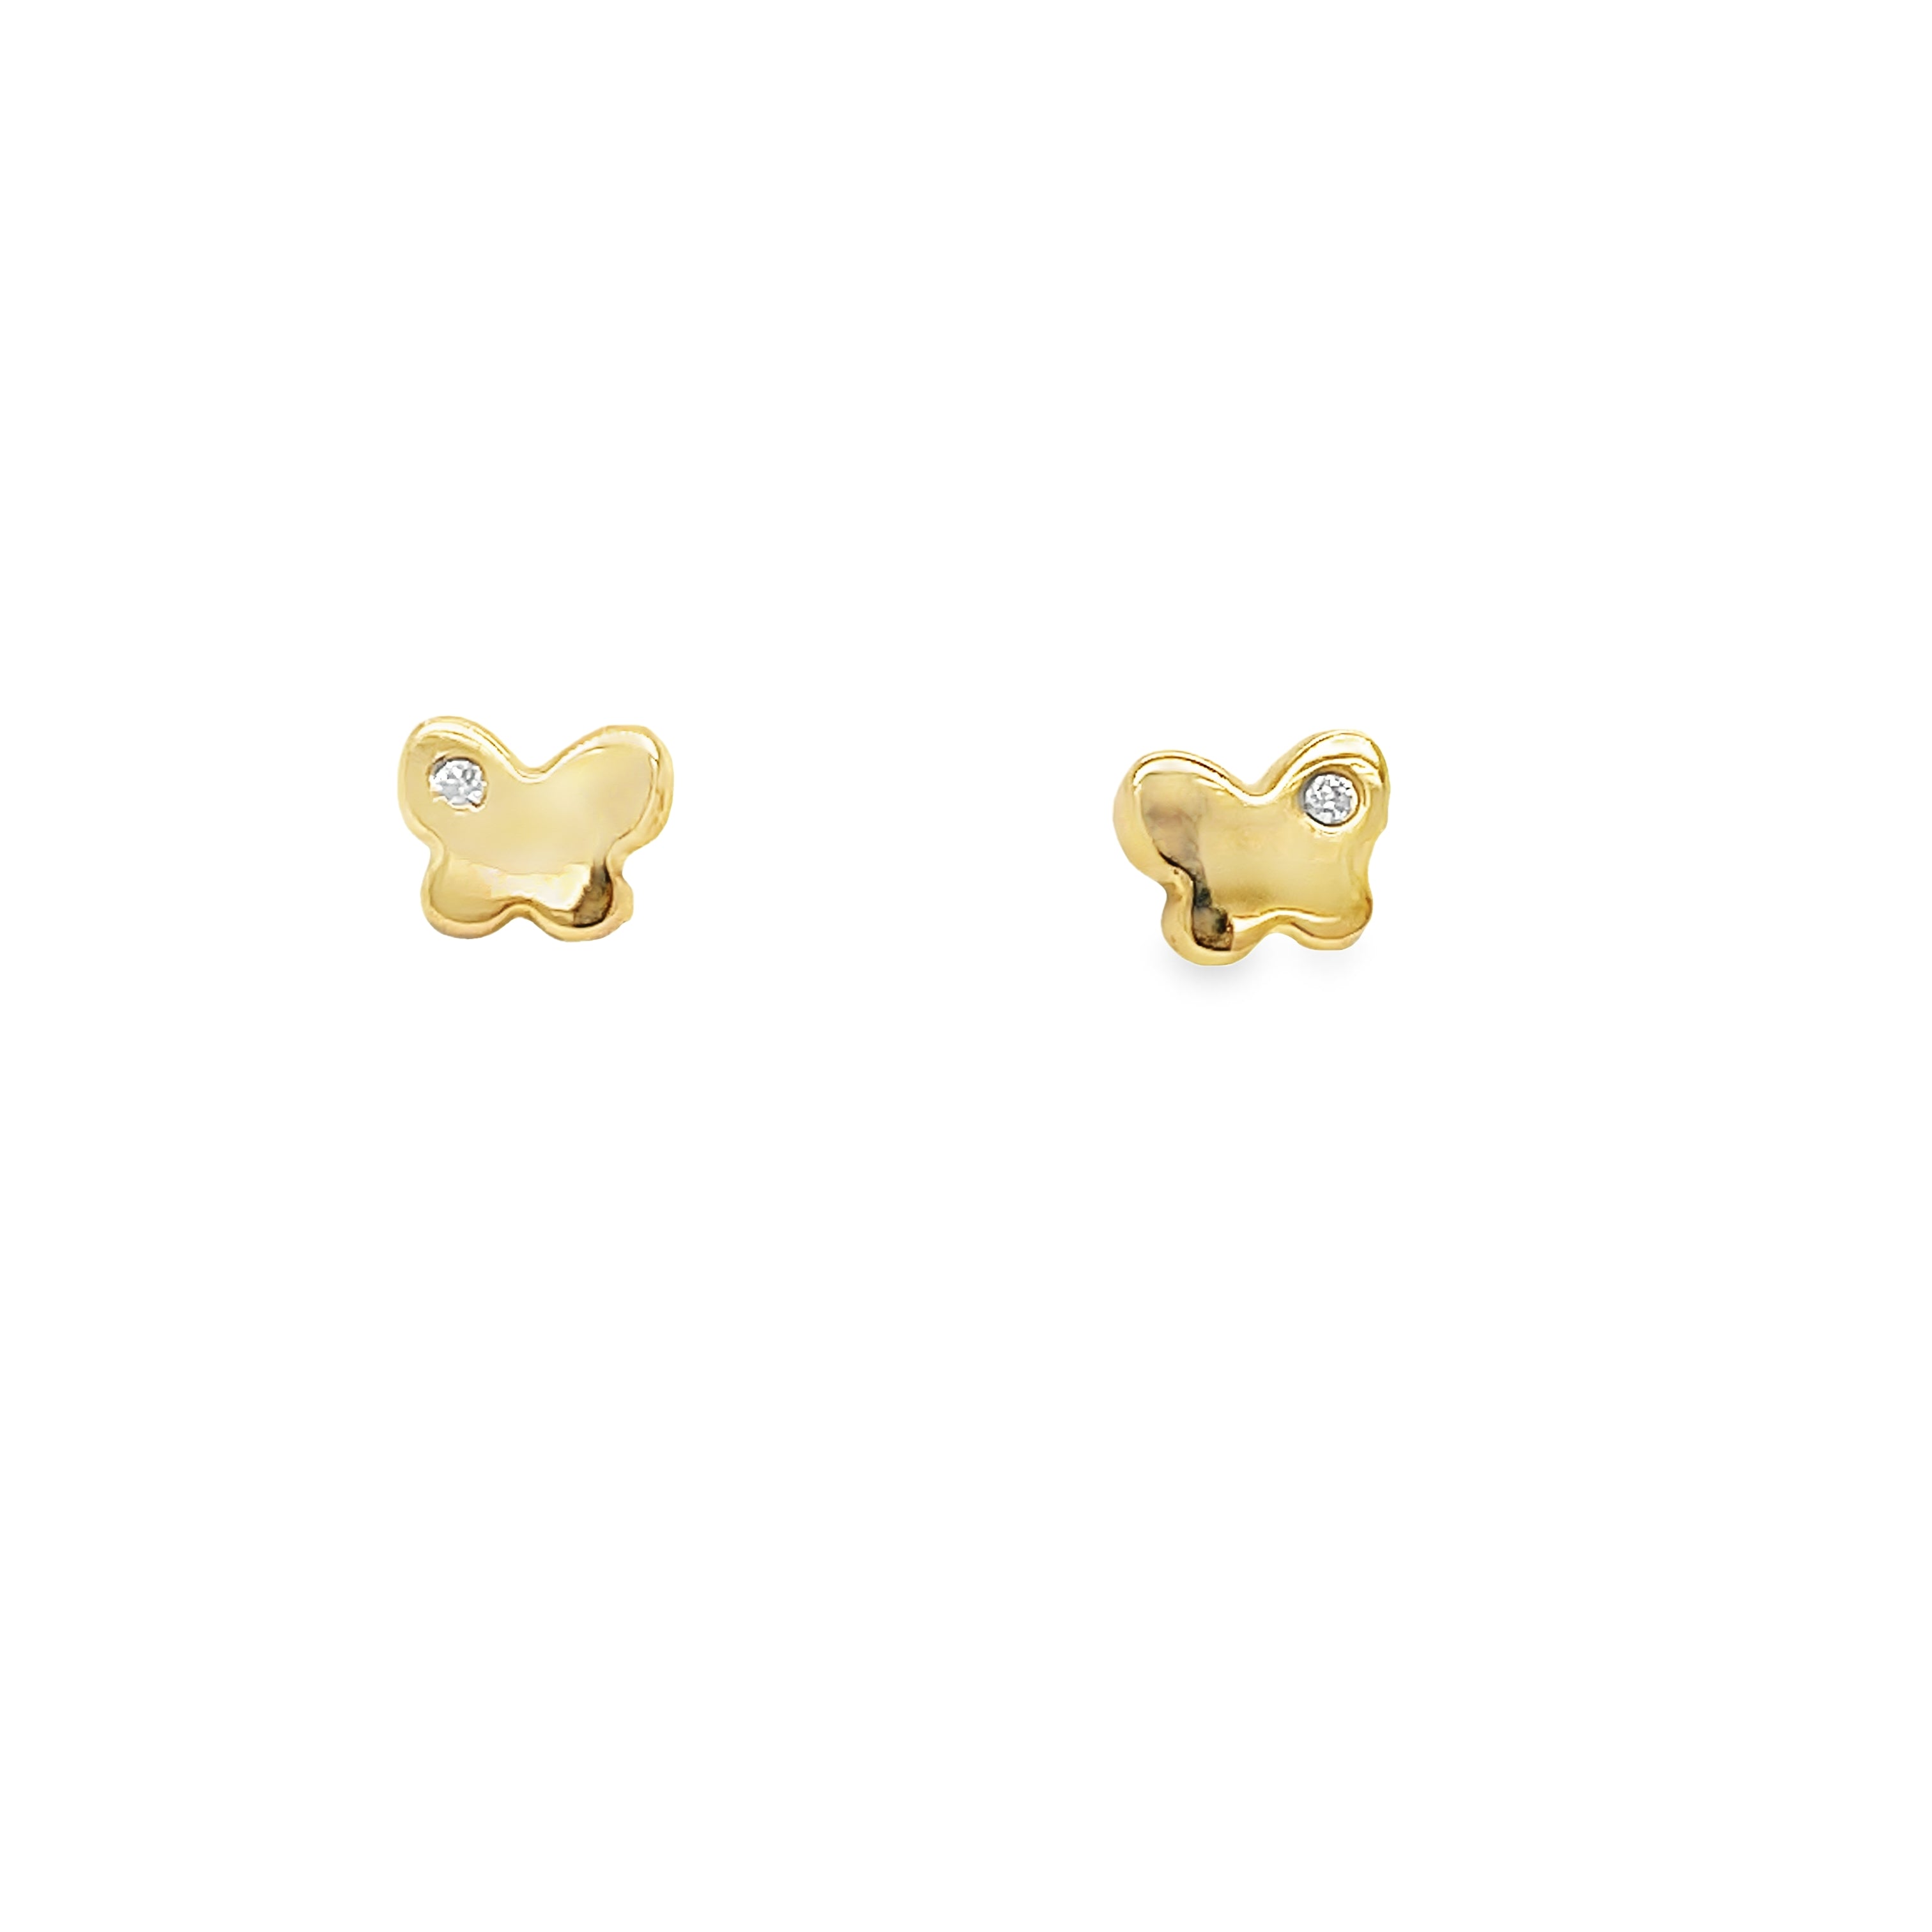 These 14k Yellow Gold Small Butterfly Baby Earrings are perfect for your little one. The butterfly design adds a touch of charm while the secure screw backs ensure they stay in place.&nbsp; Make a delicate and stylish addition to any baby's wardrobe.